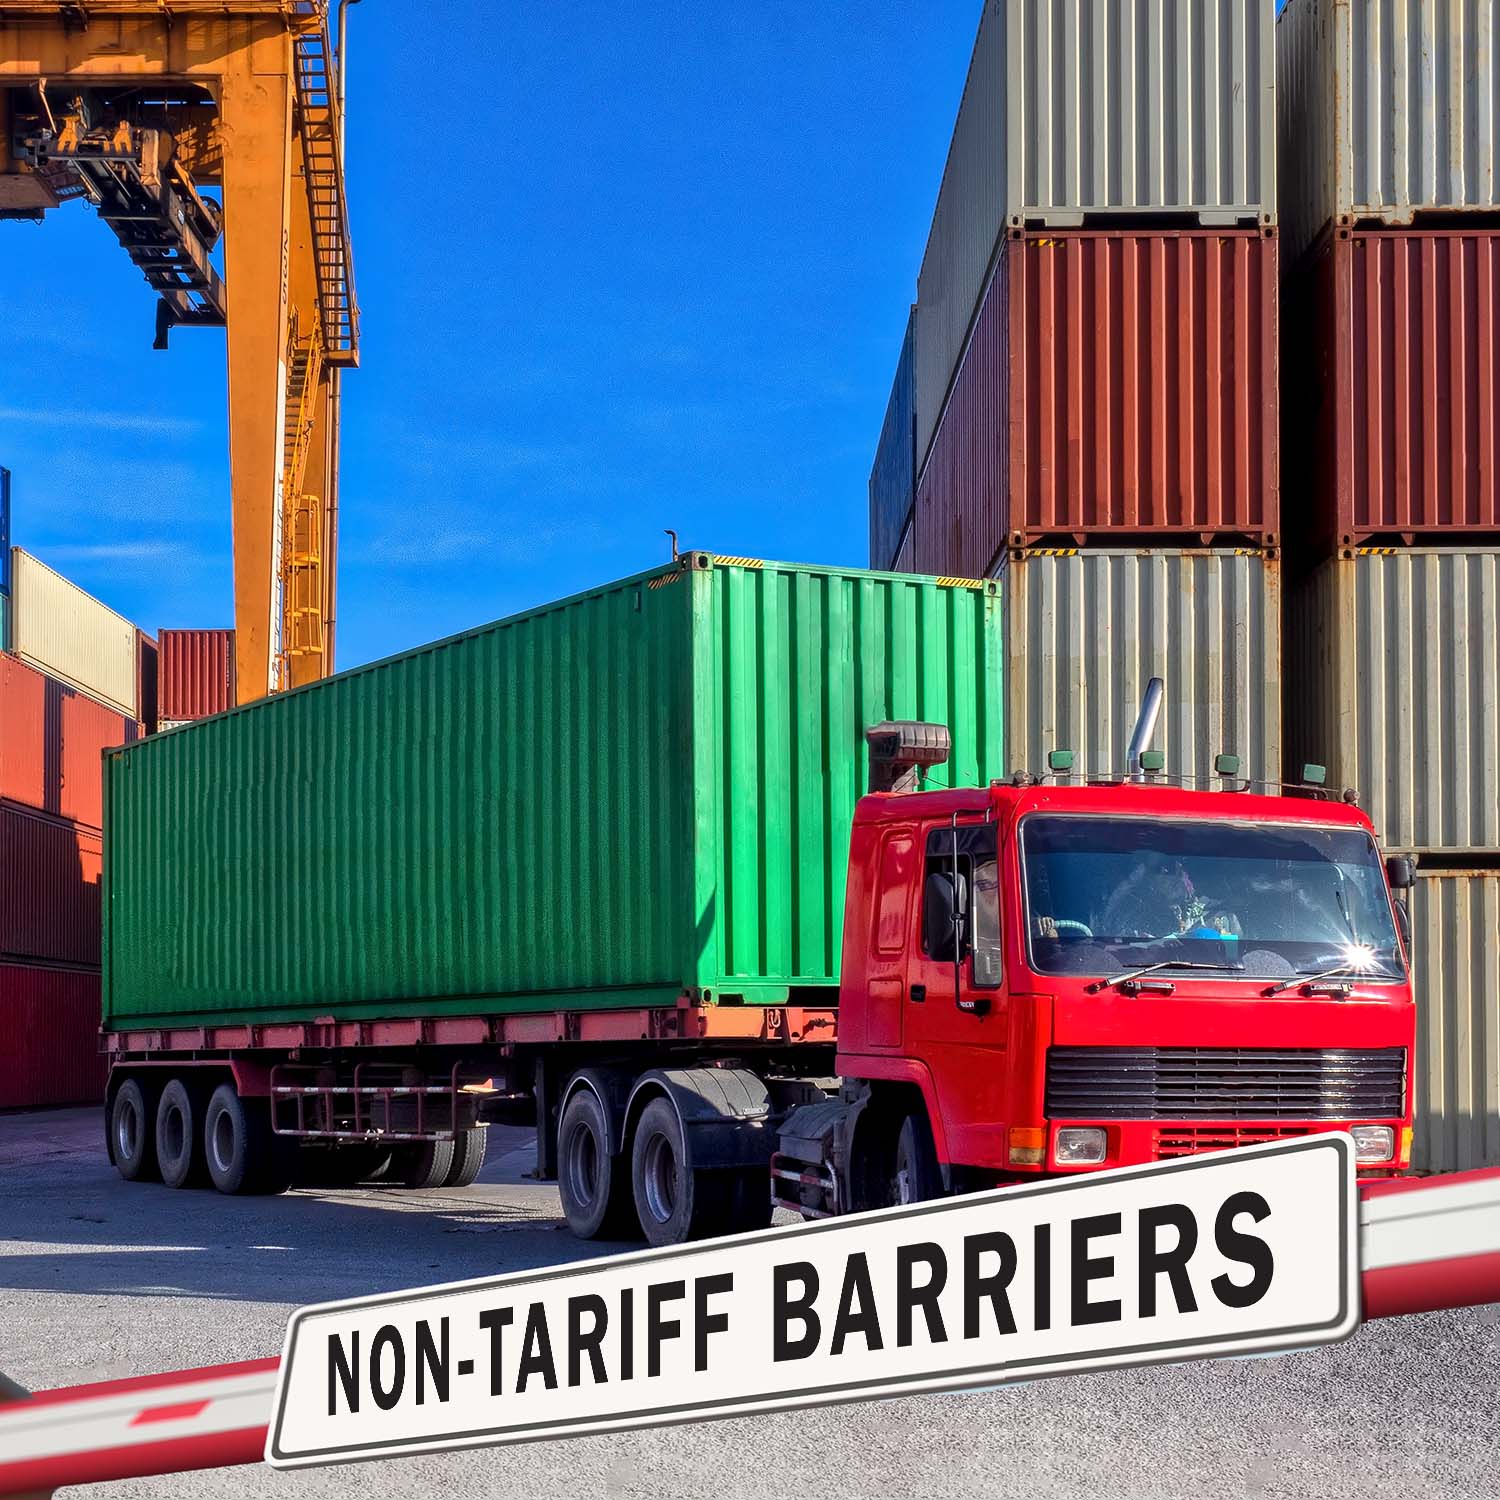 Many countries use non-tariff barriers as a means to restrict imports.